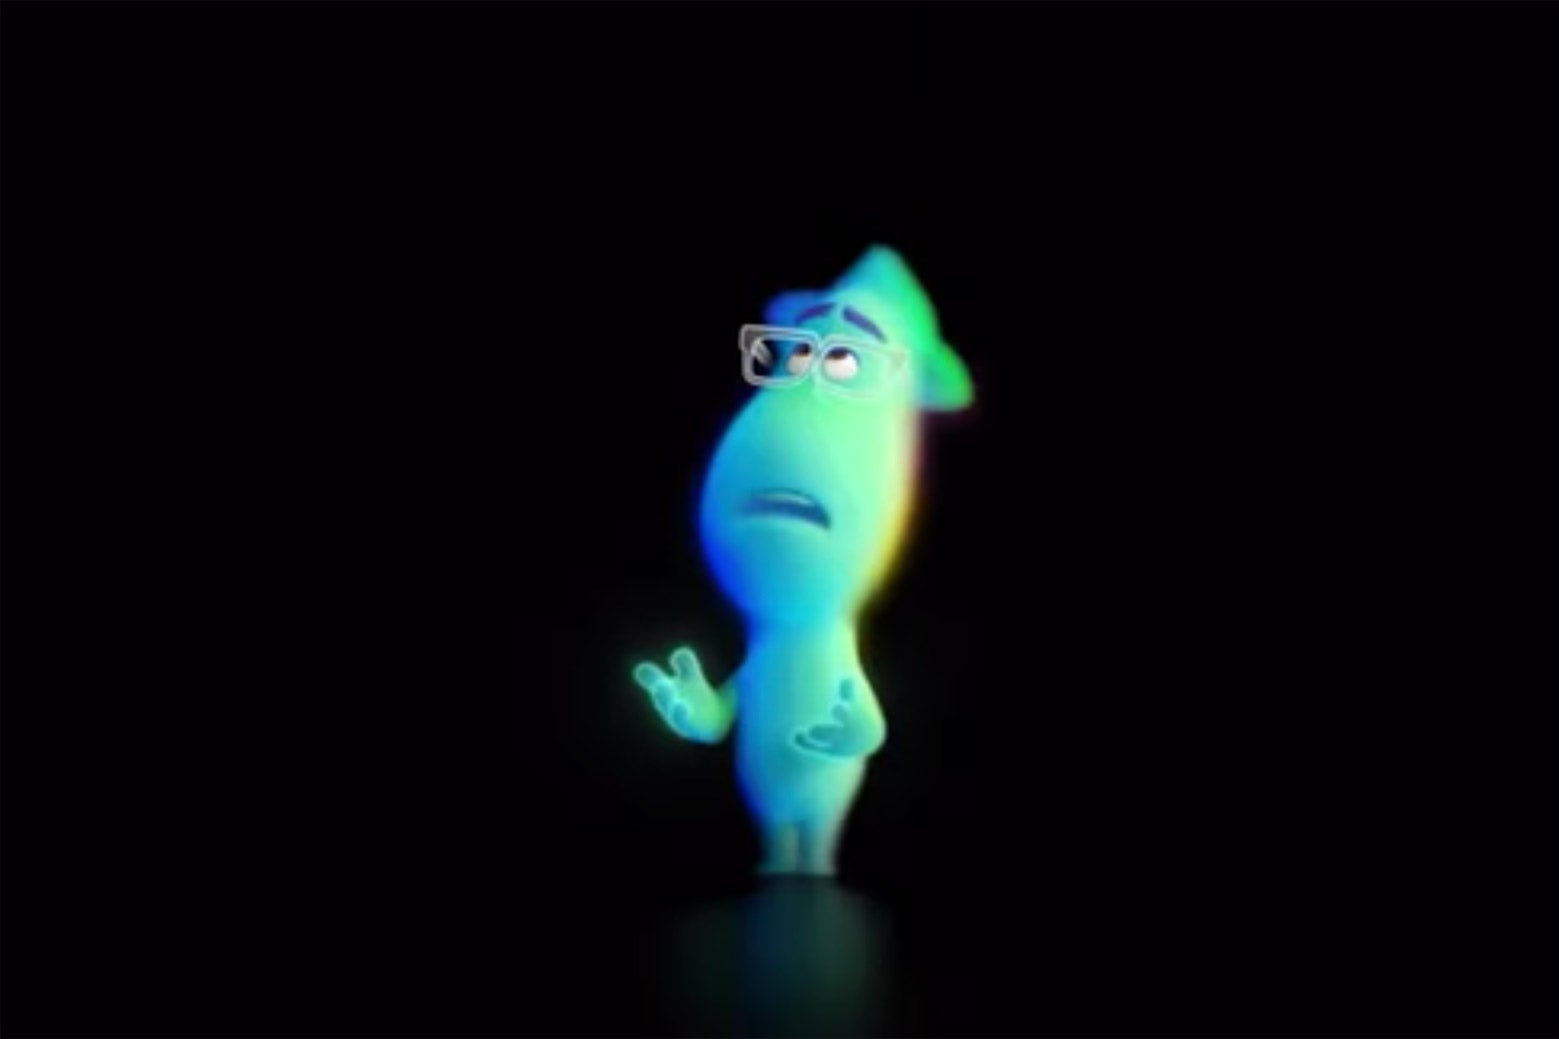 A greenish-blue blob character in glasses and a fedora stands in a black void.